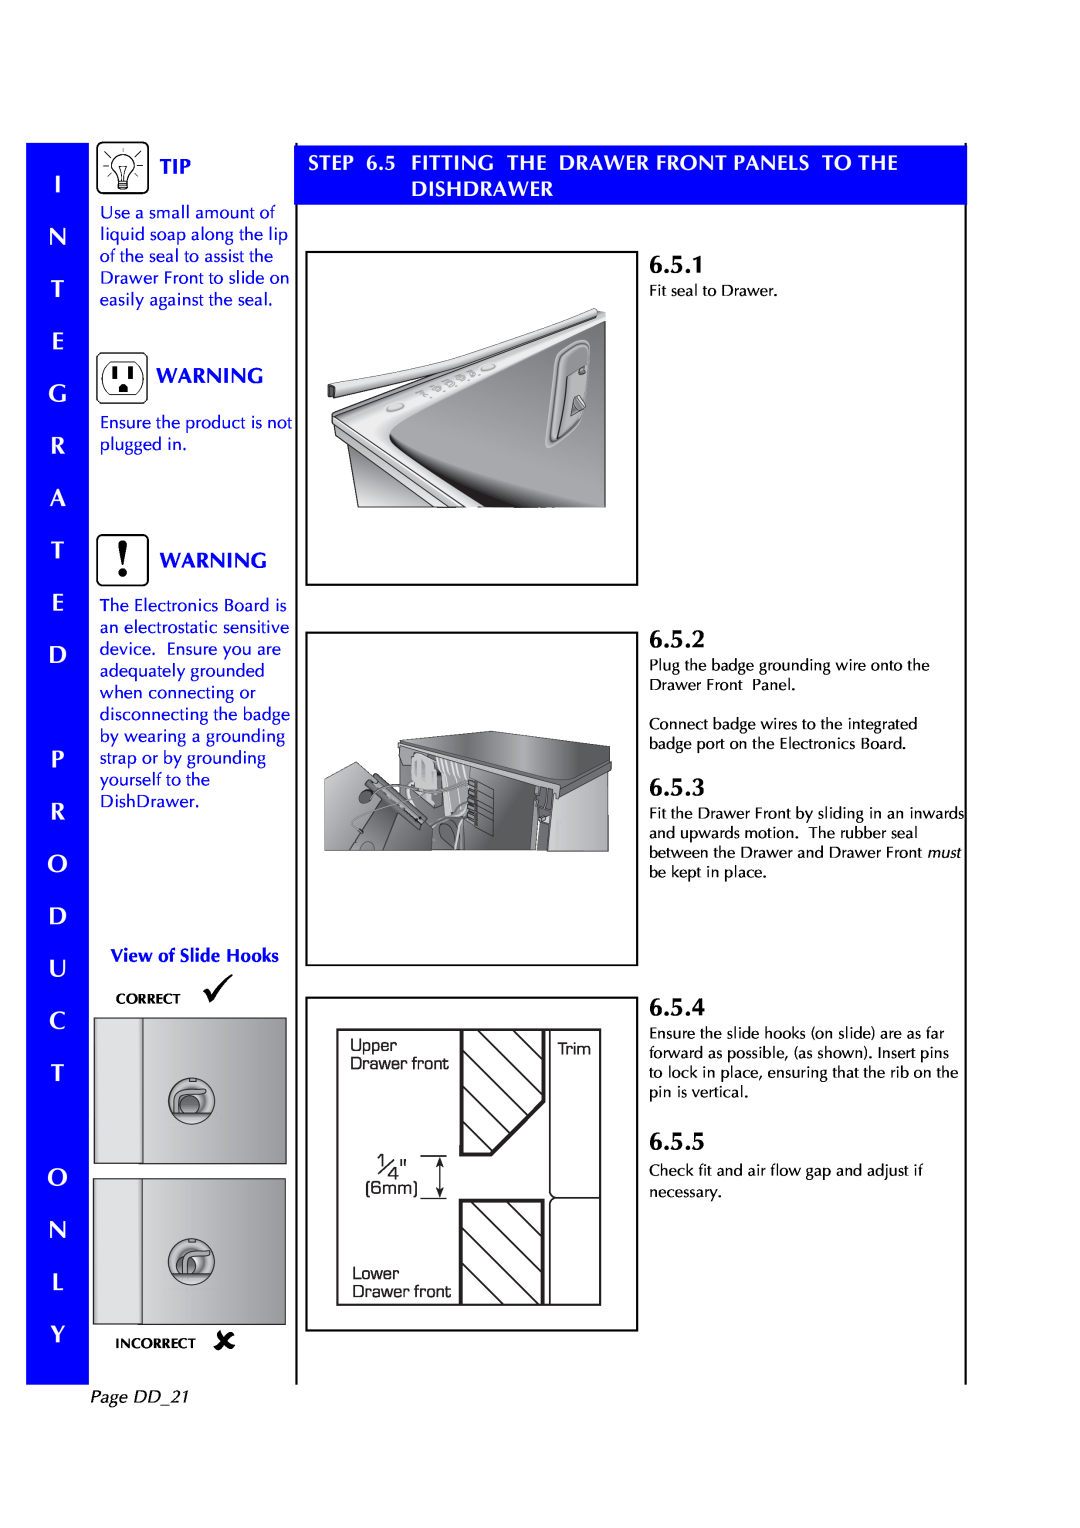 Fisher & Paykel DD602 6.5.1, 6.5.2, 6.5.3, 6.5.4, 6.5.5, 5 FITTING THE DRAWER FRONT PANELS TO THE DISHDRAWER, Page DD21 